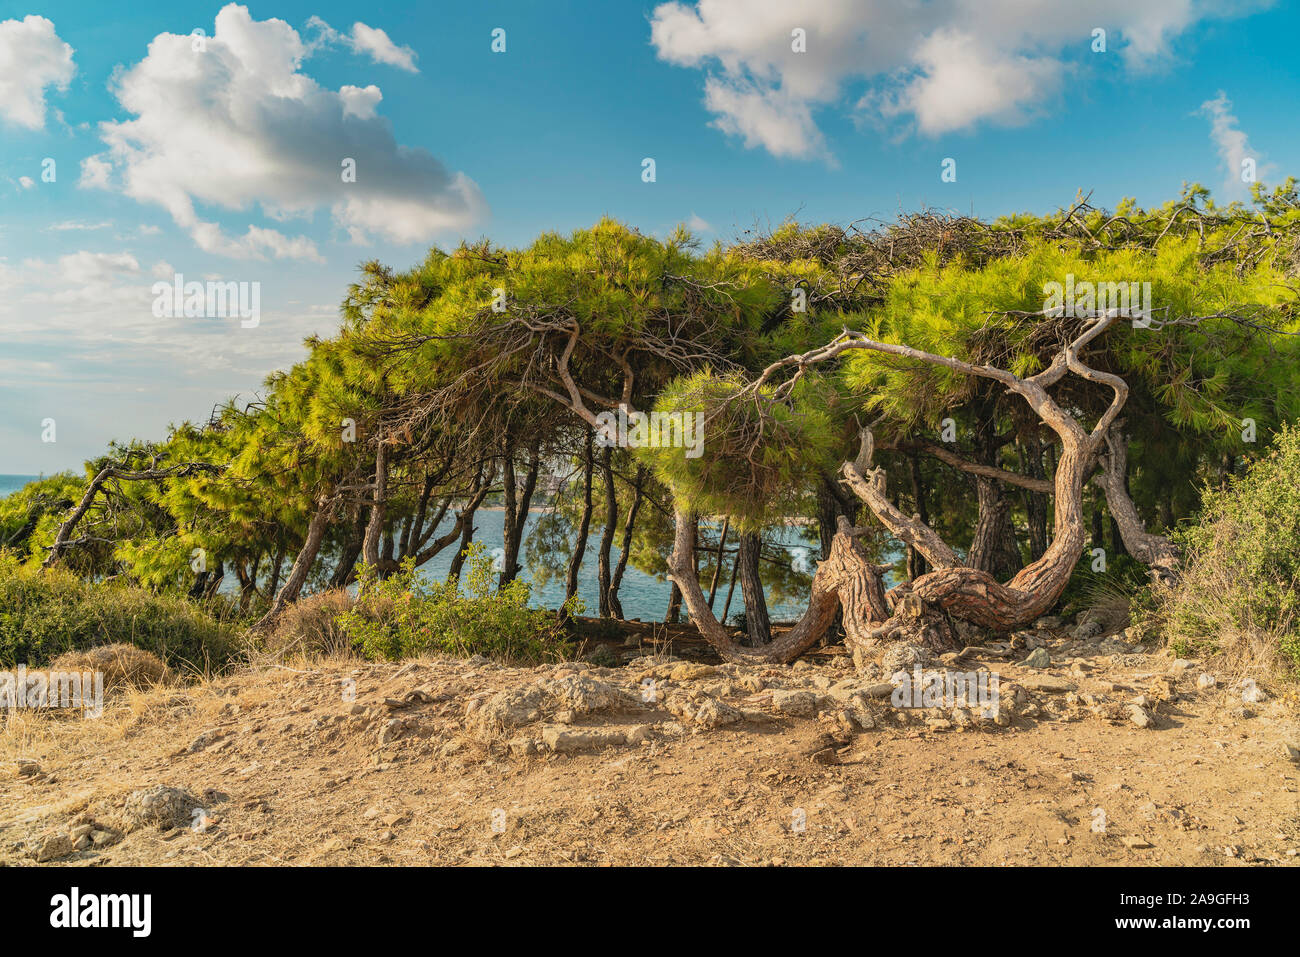 Beautiful landscape with turkish pine, sea in the background and nice blue sky with clouds. Green pinus brutia with flat crowns and bent trunks Stock Photo